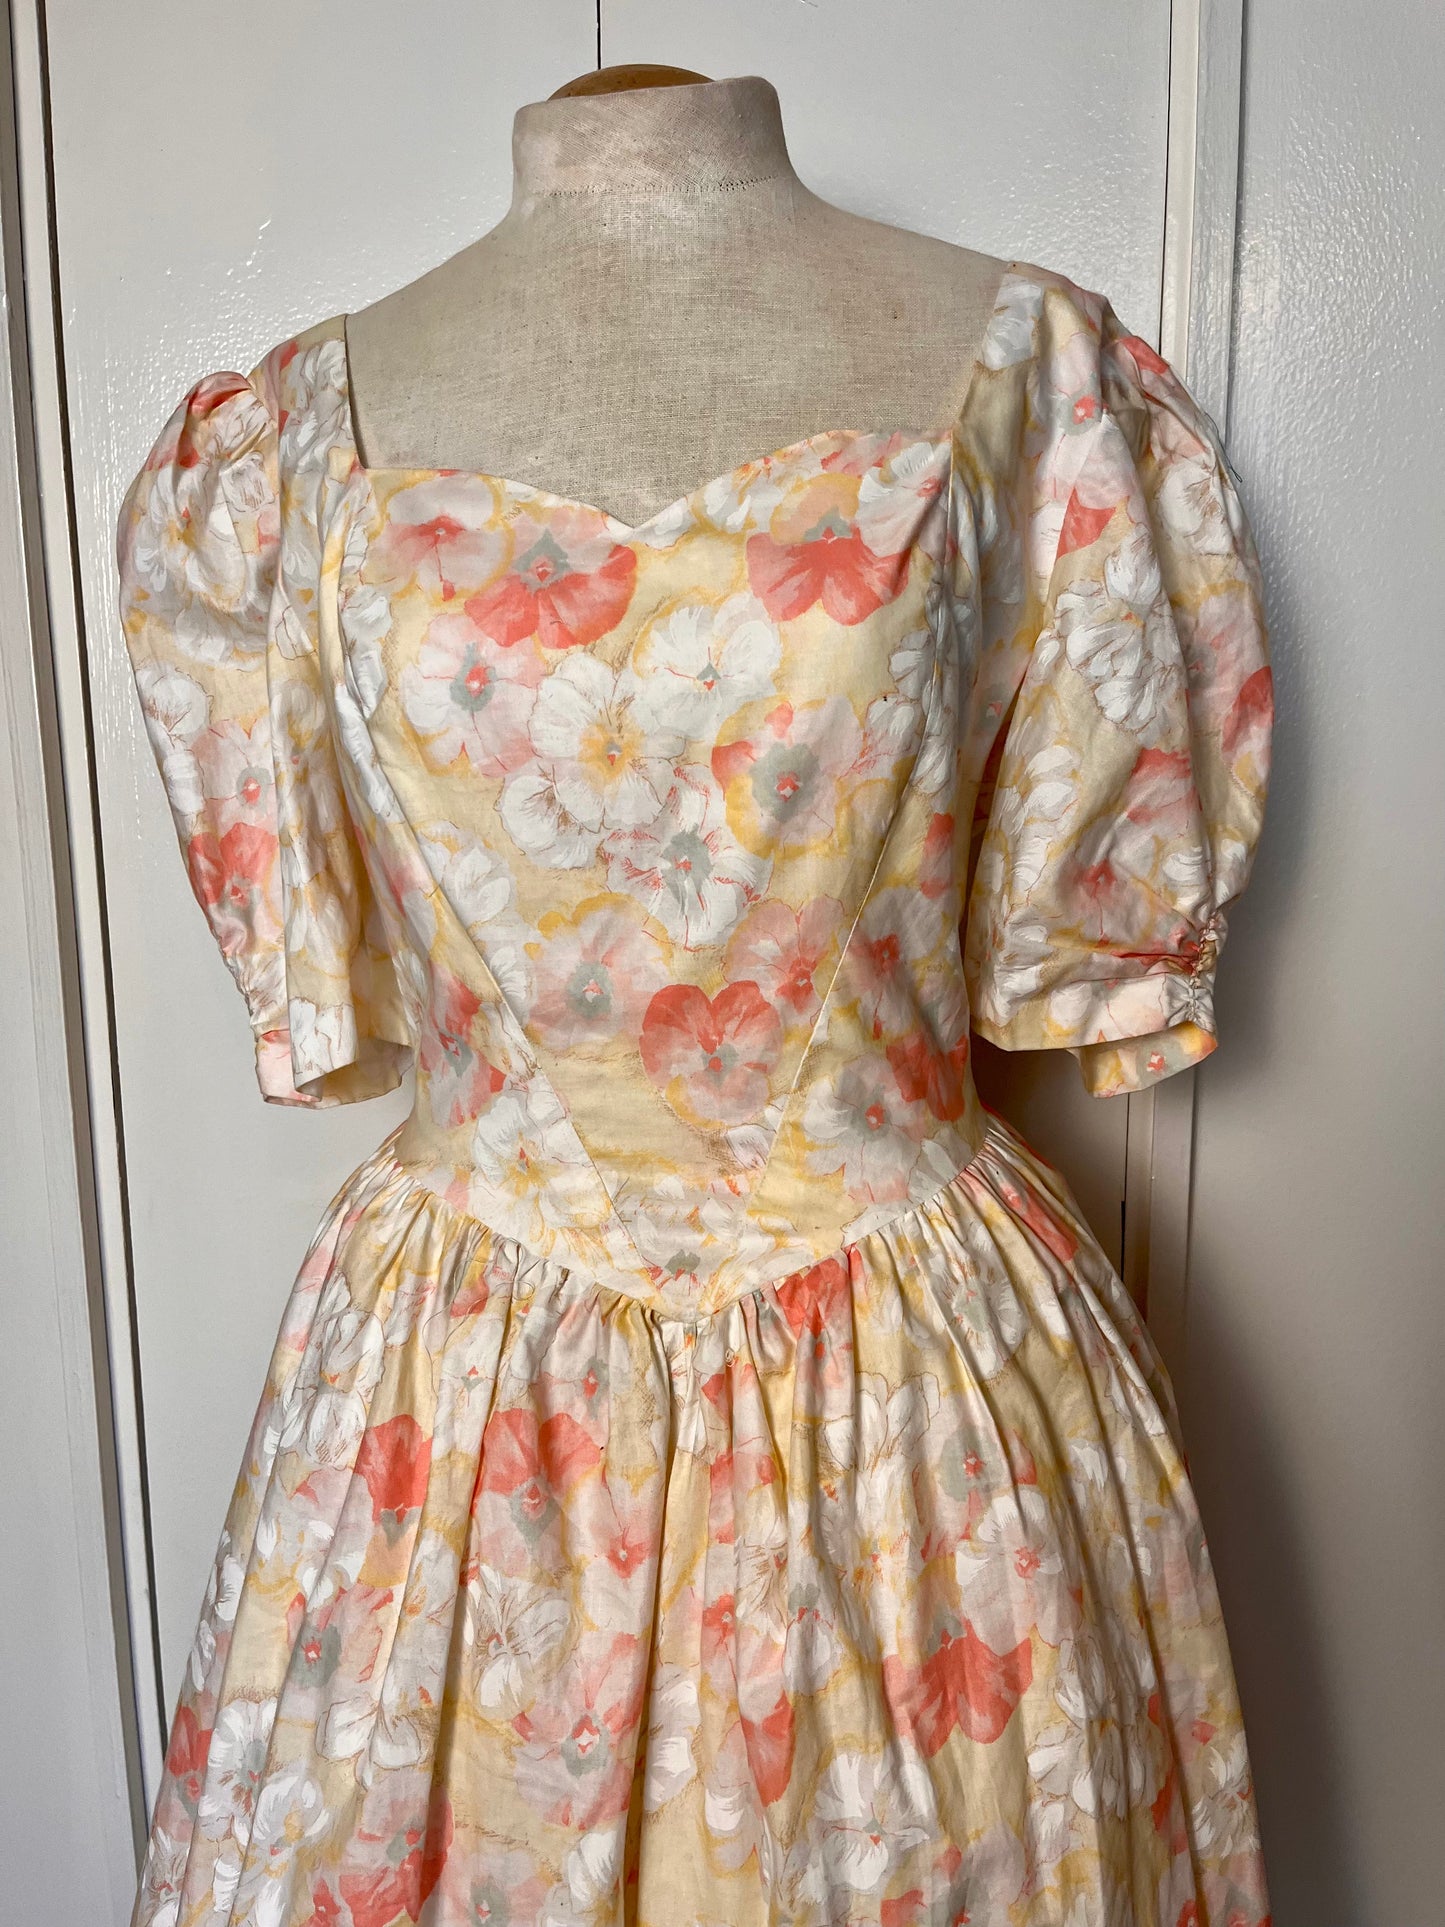 Vintage 1980's "Home-Sewn" Yellow Floral Dress (in the style of Laura Ashley)